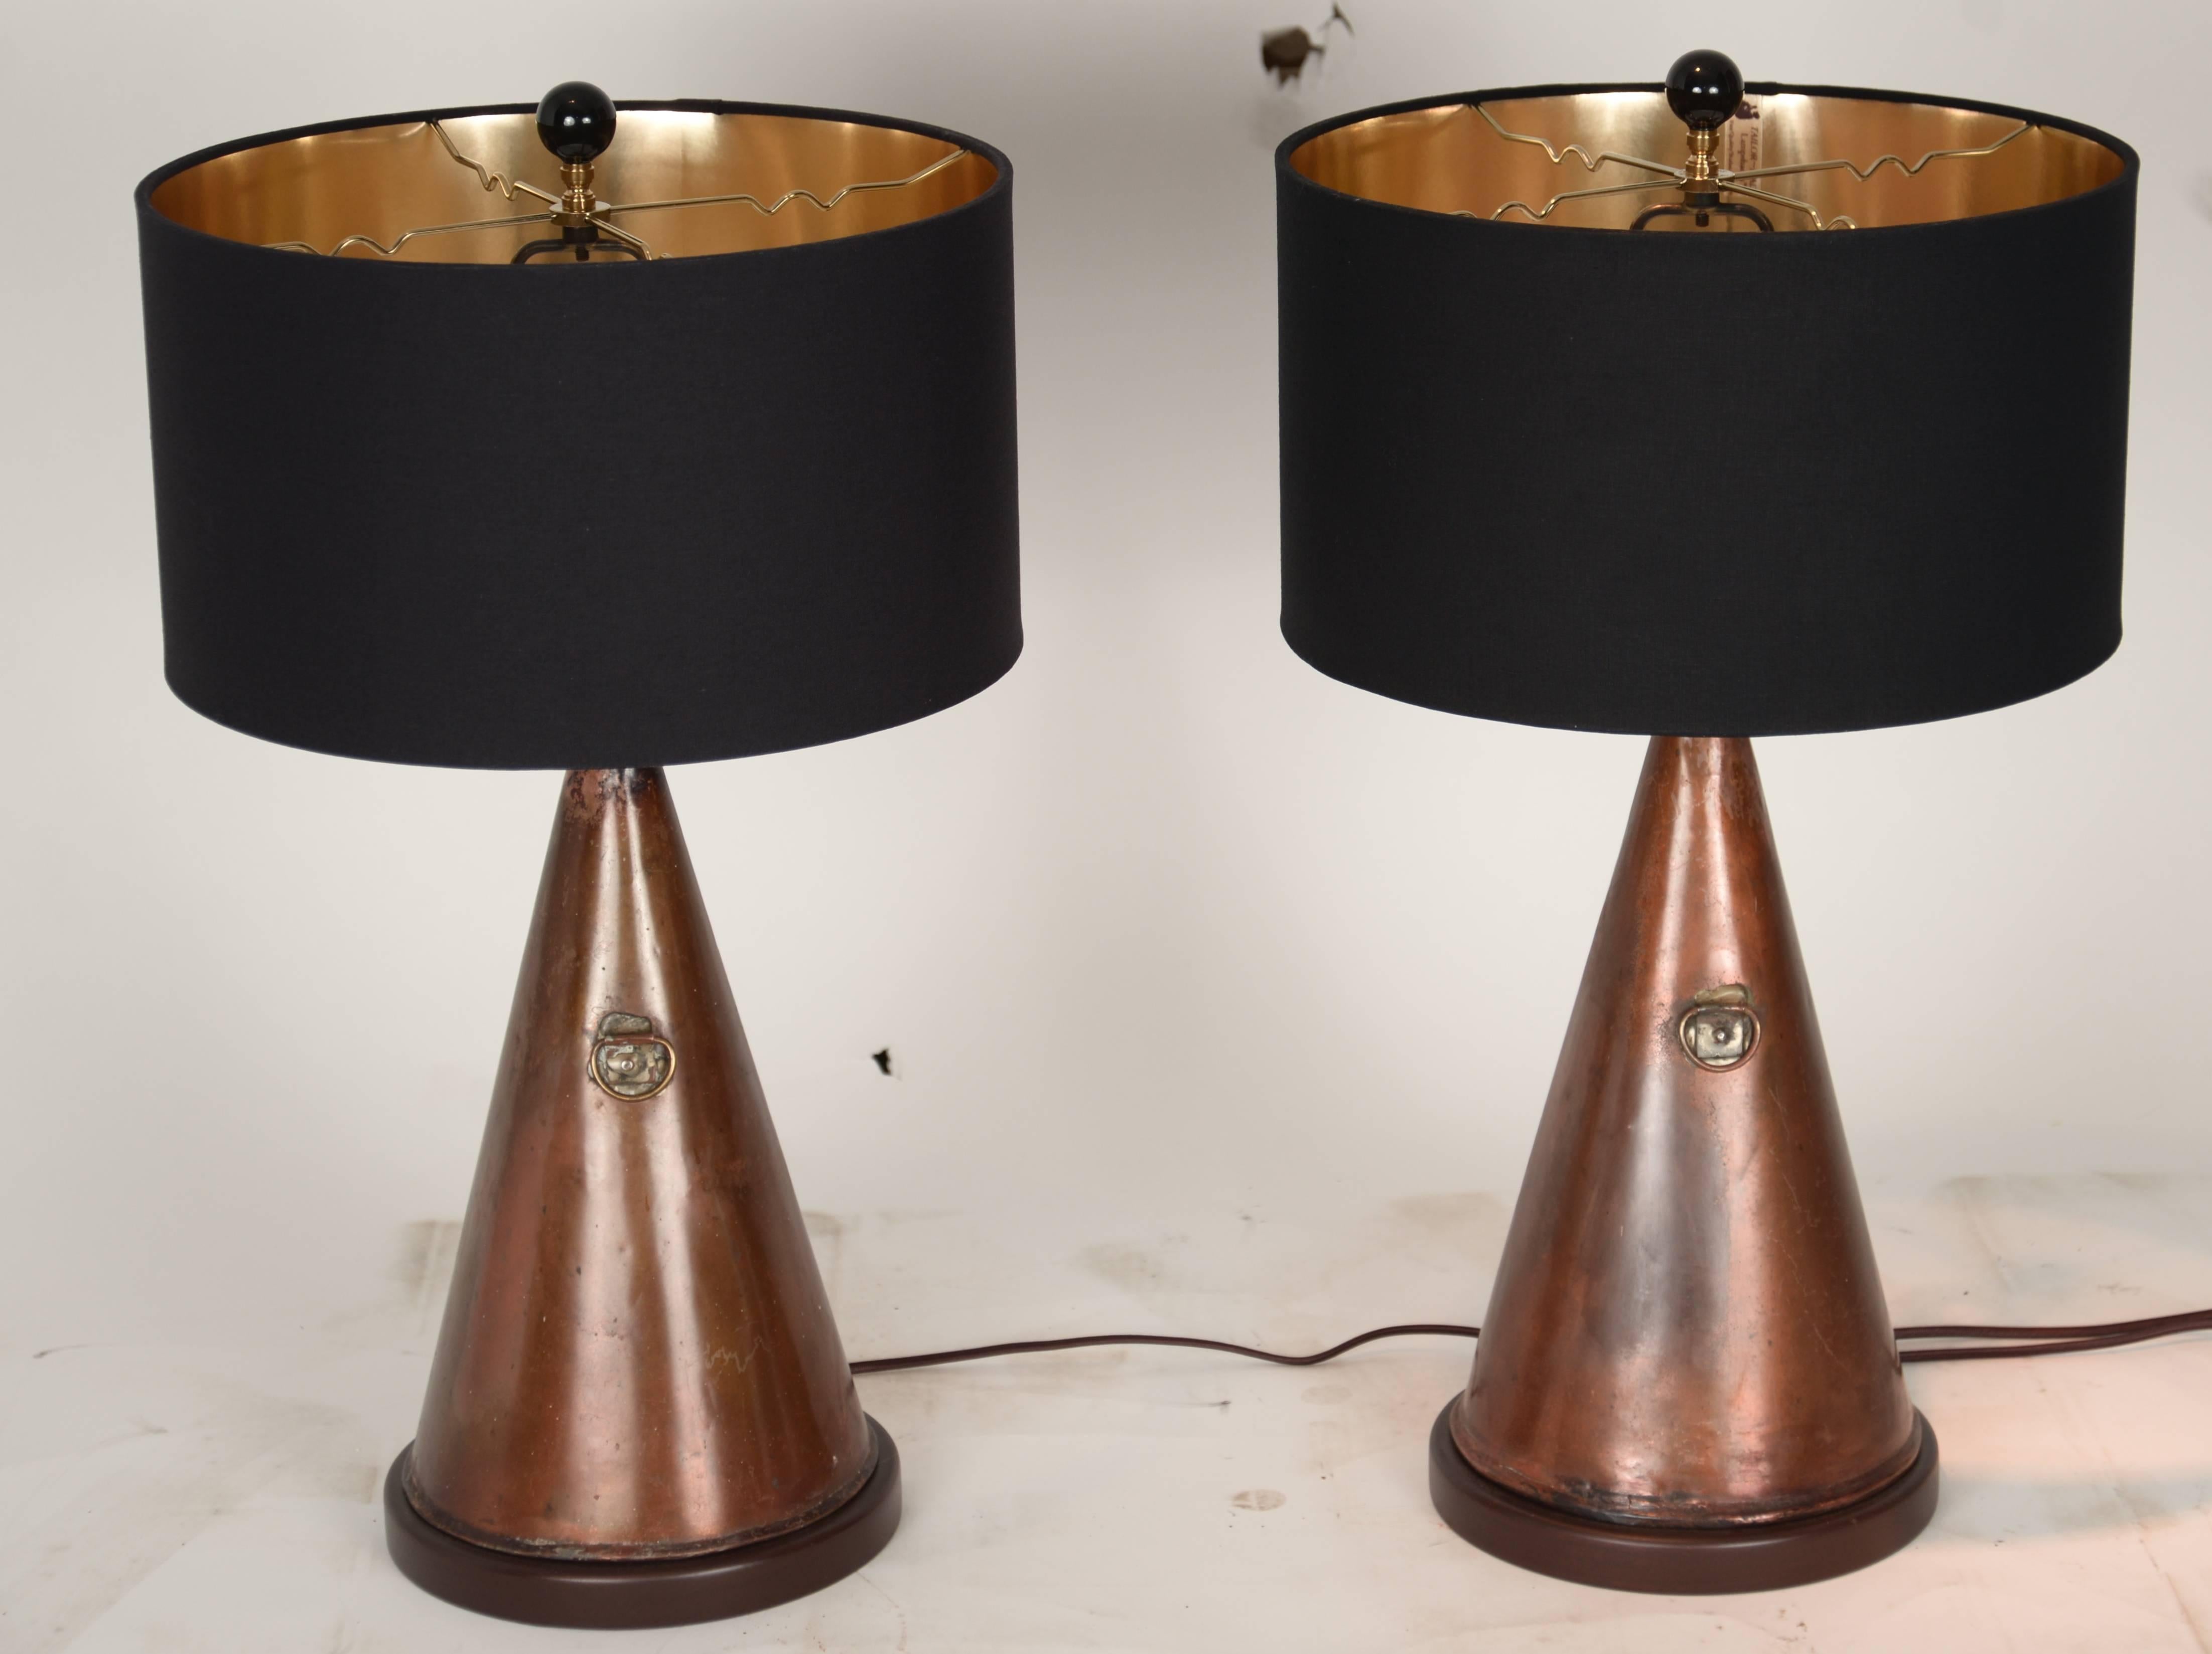 Pair of custom-made table lamps made out of antique ship foghorns with new gold lined black lampshades.